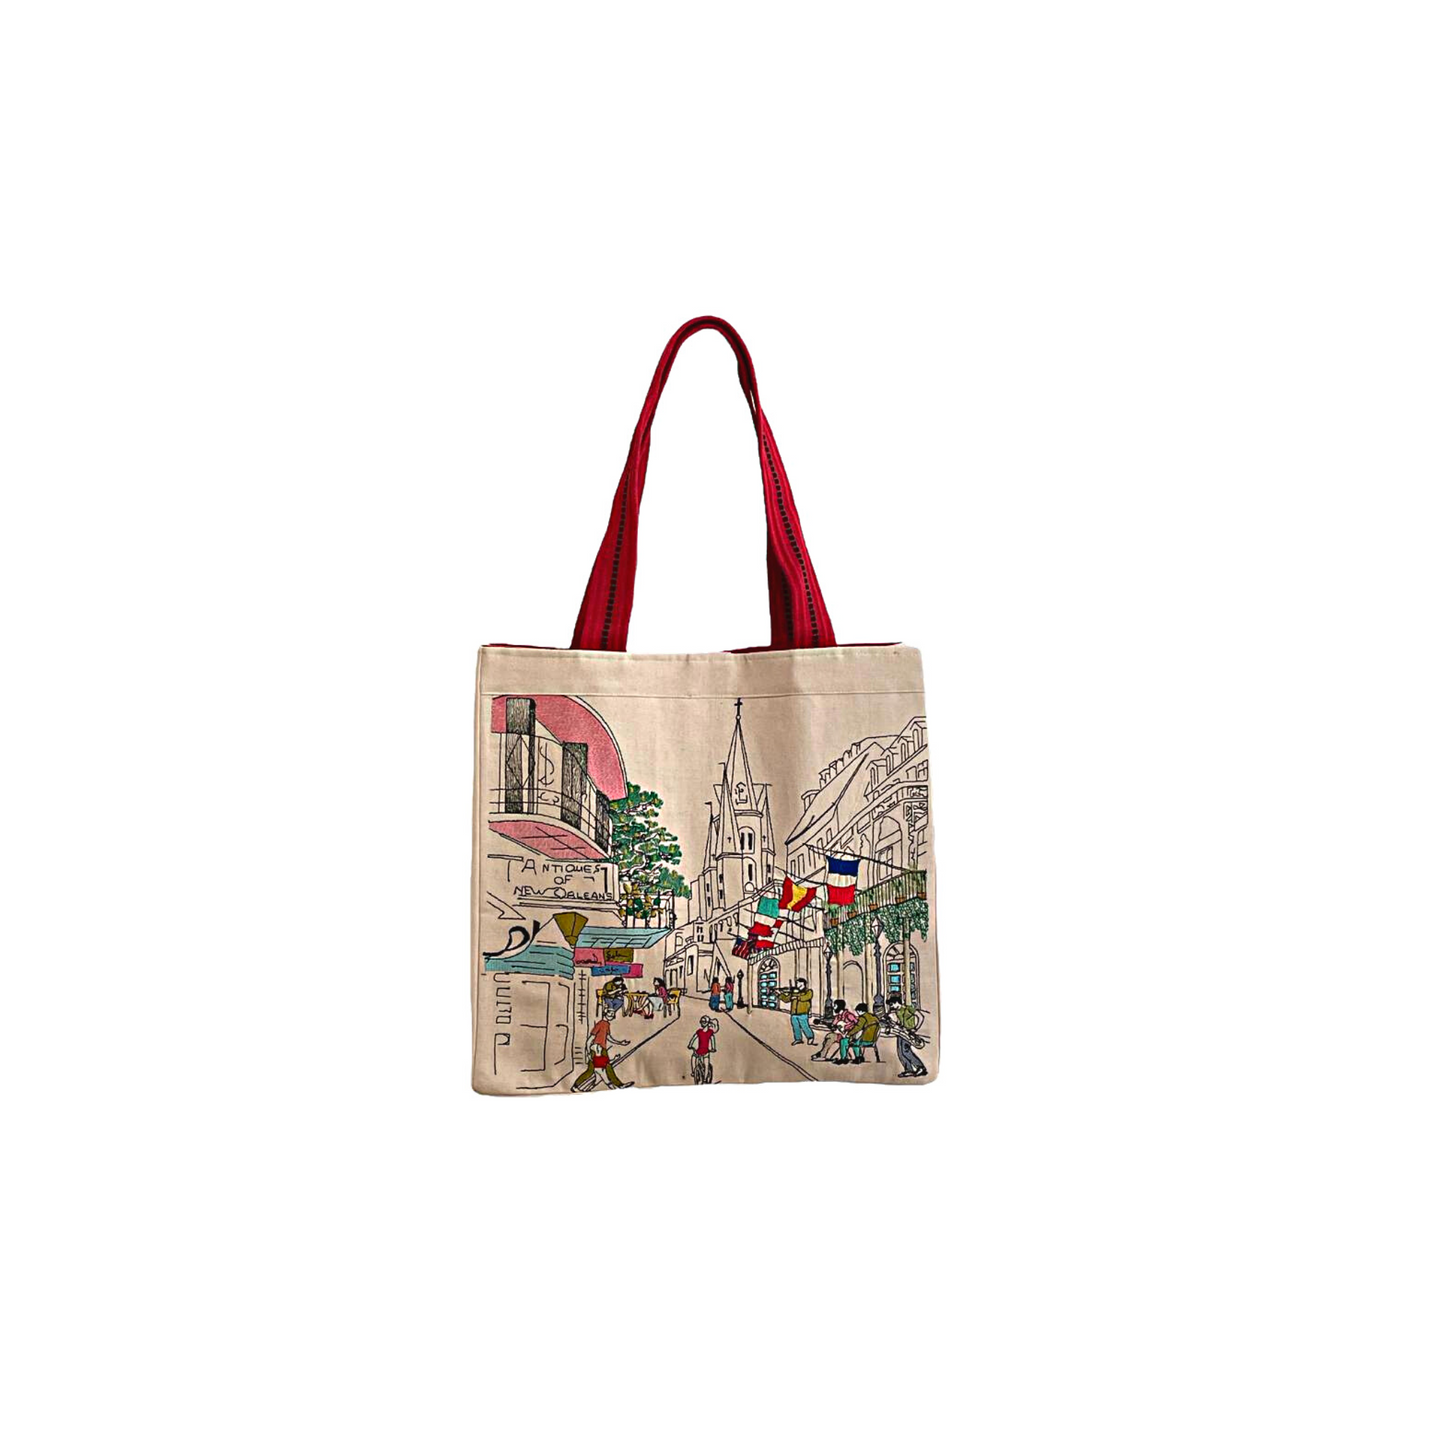 Embroidered City Artistry New Orleans Tote Bag